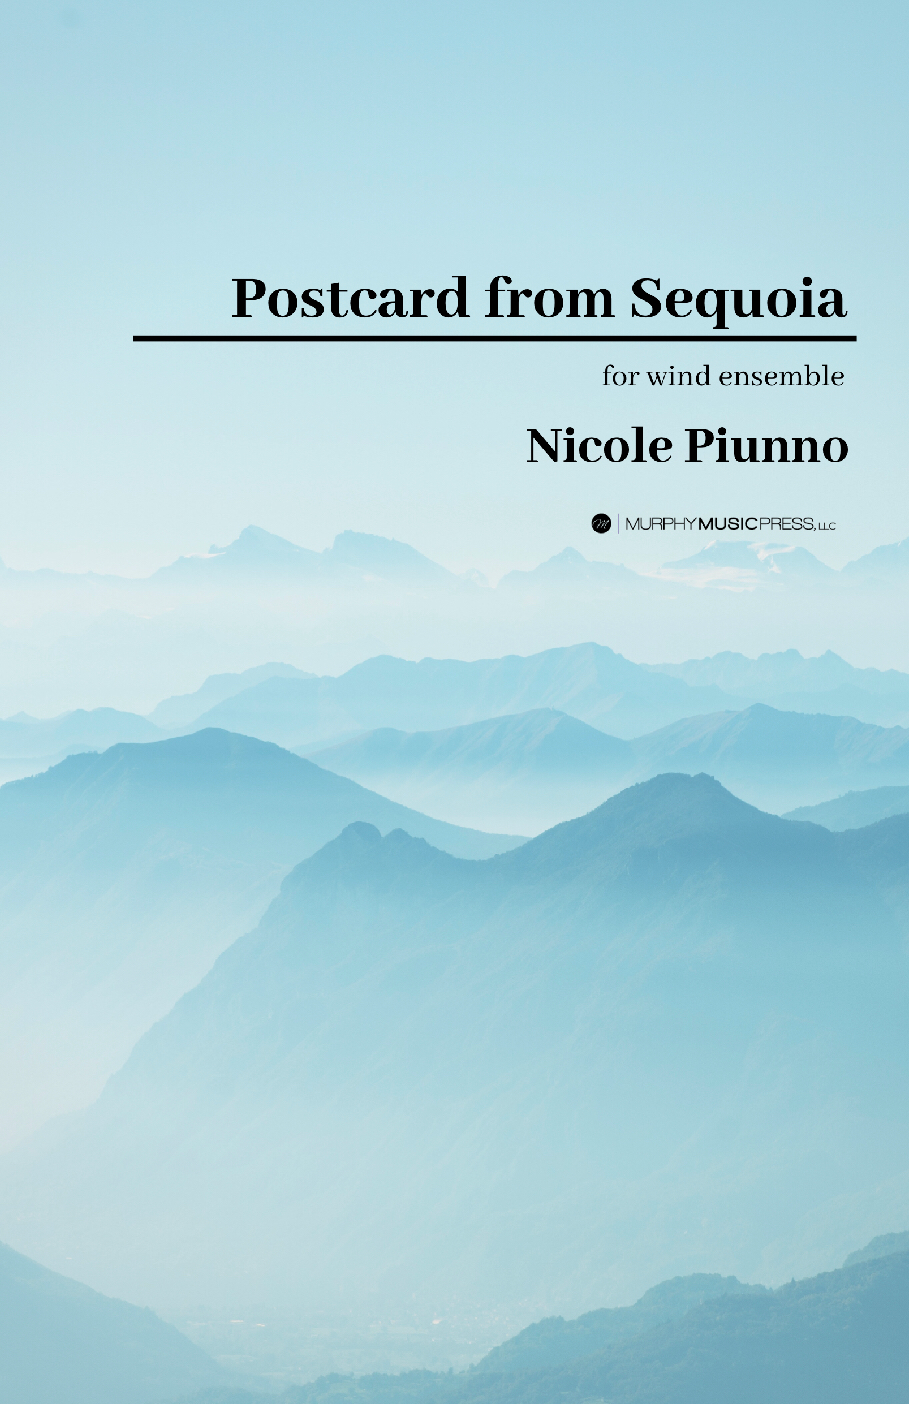 Postcard From Sequoia by Nicole Piunno